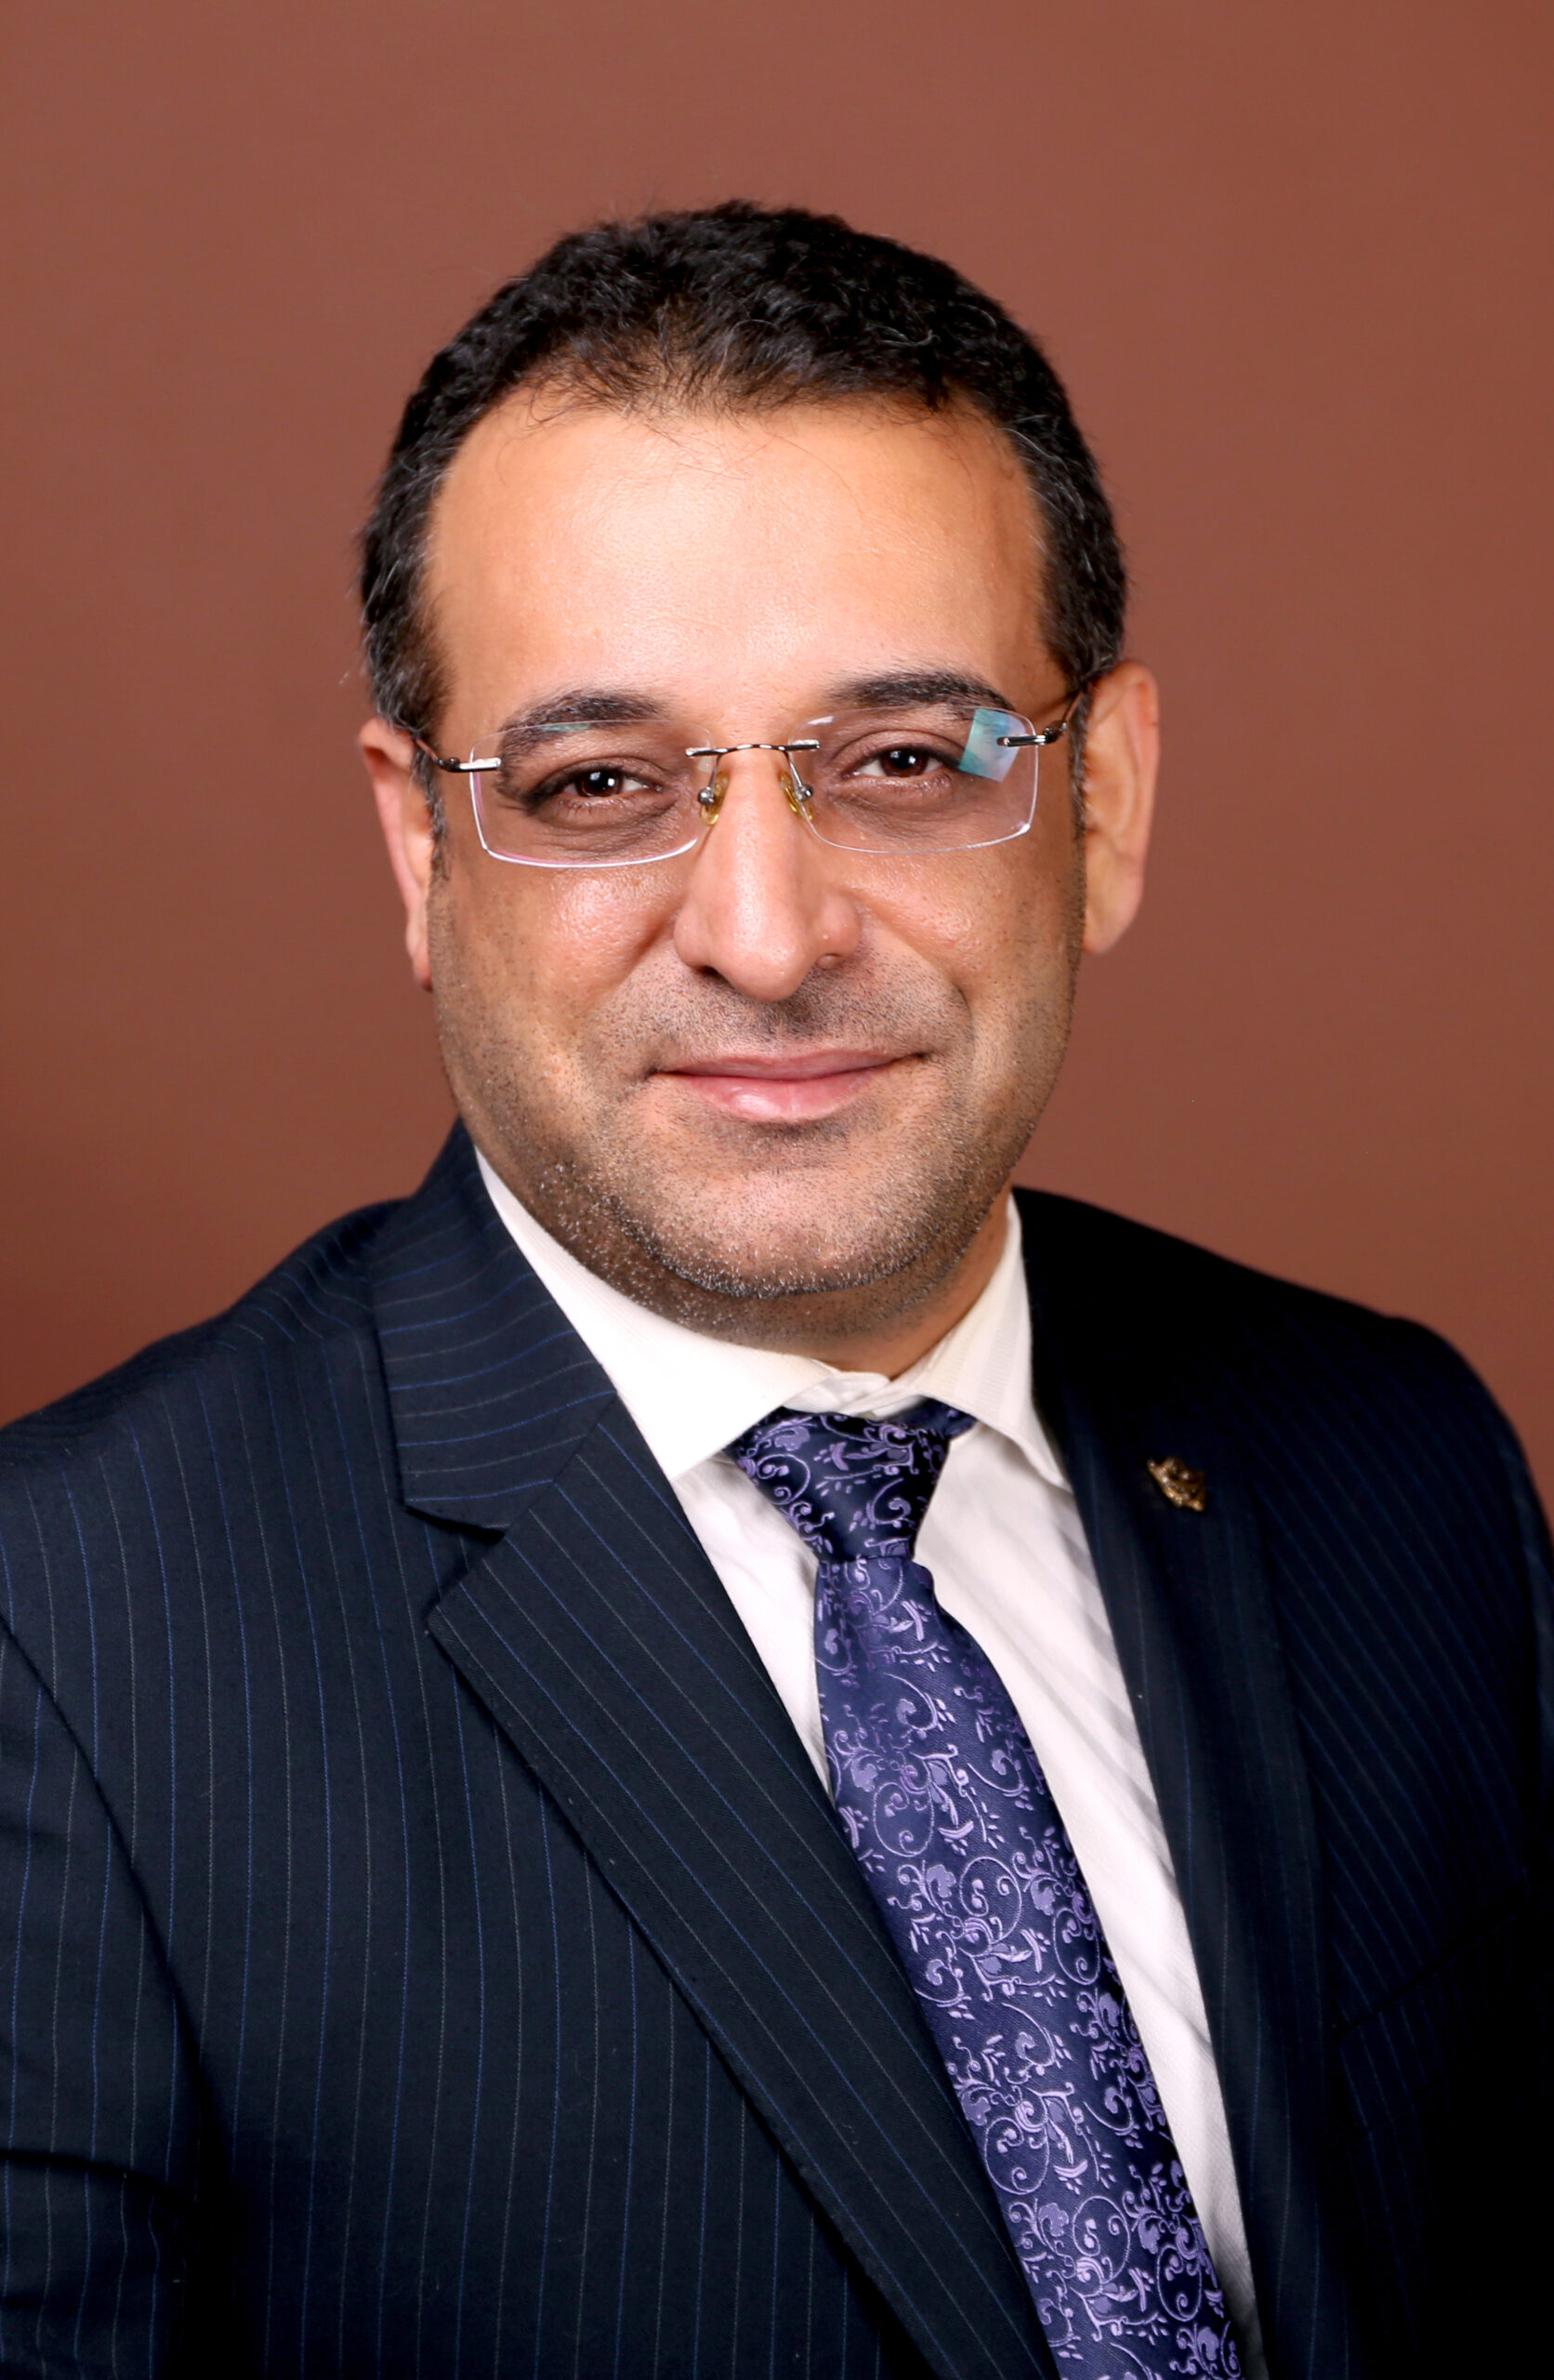 Headshot of an arab man in glasses and a suit